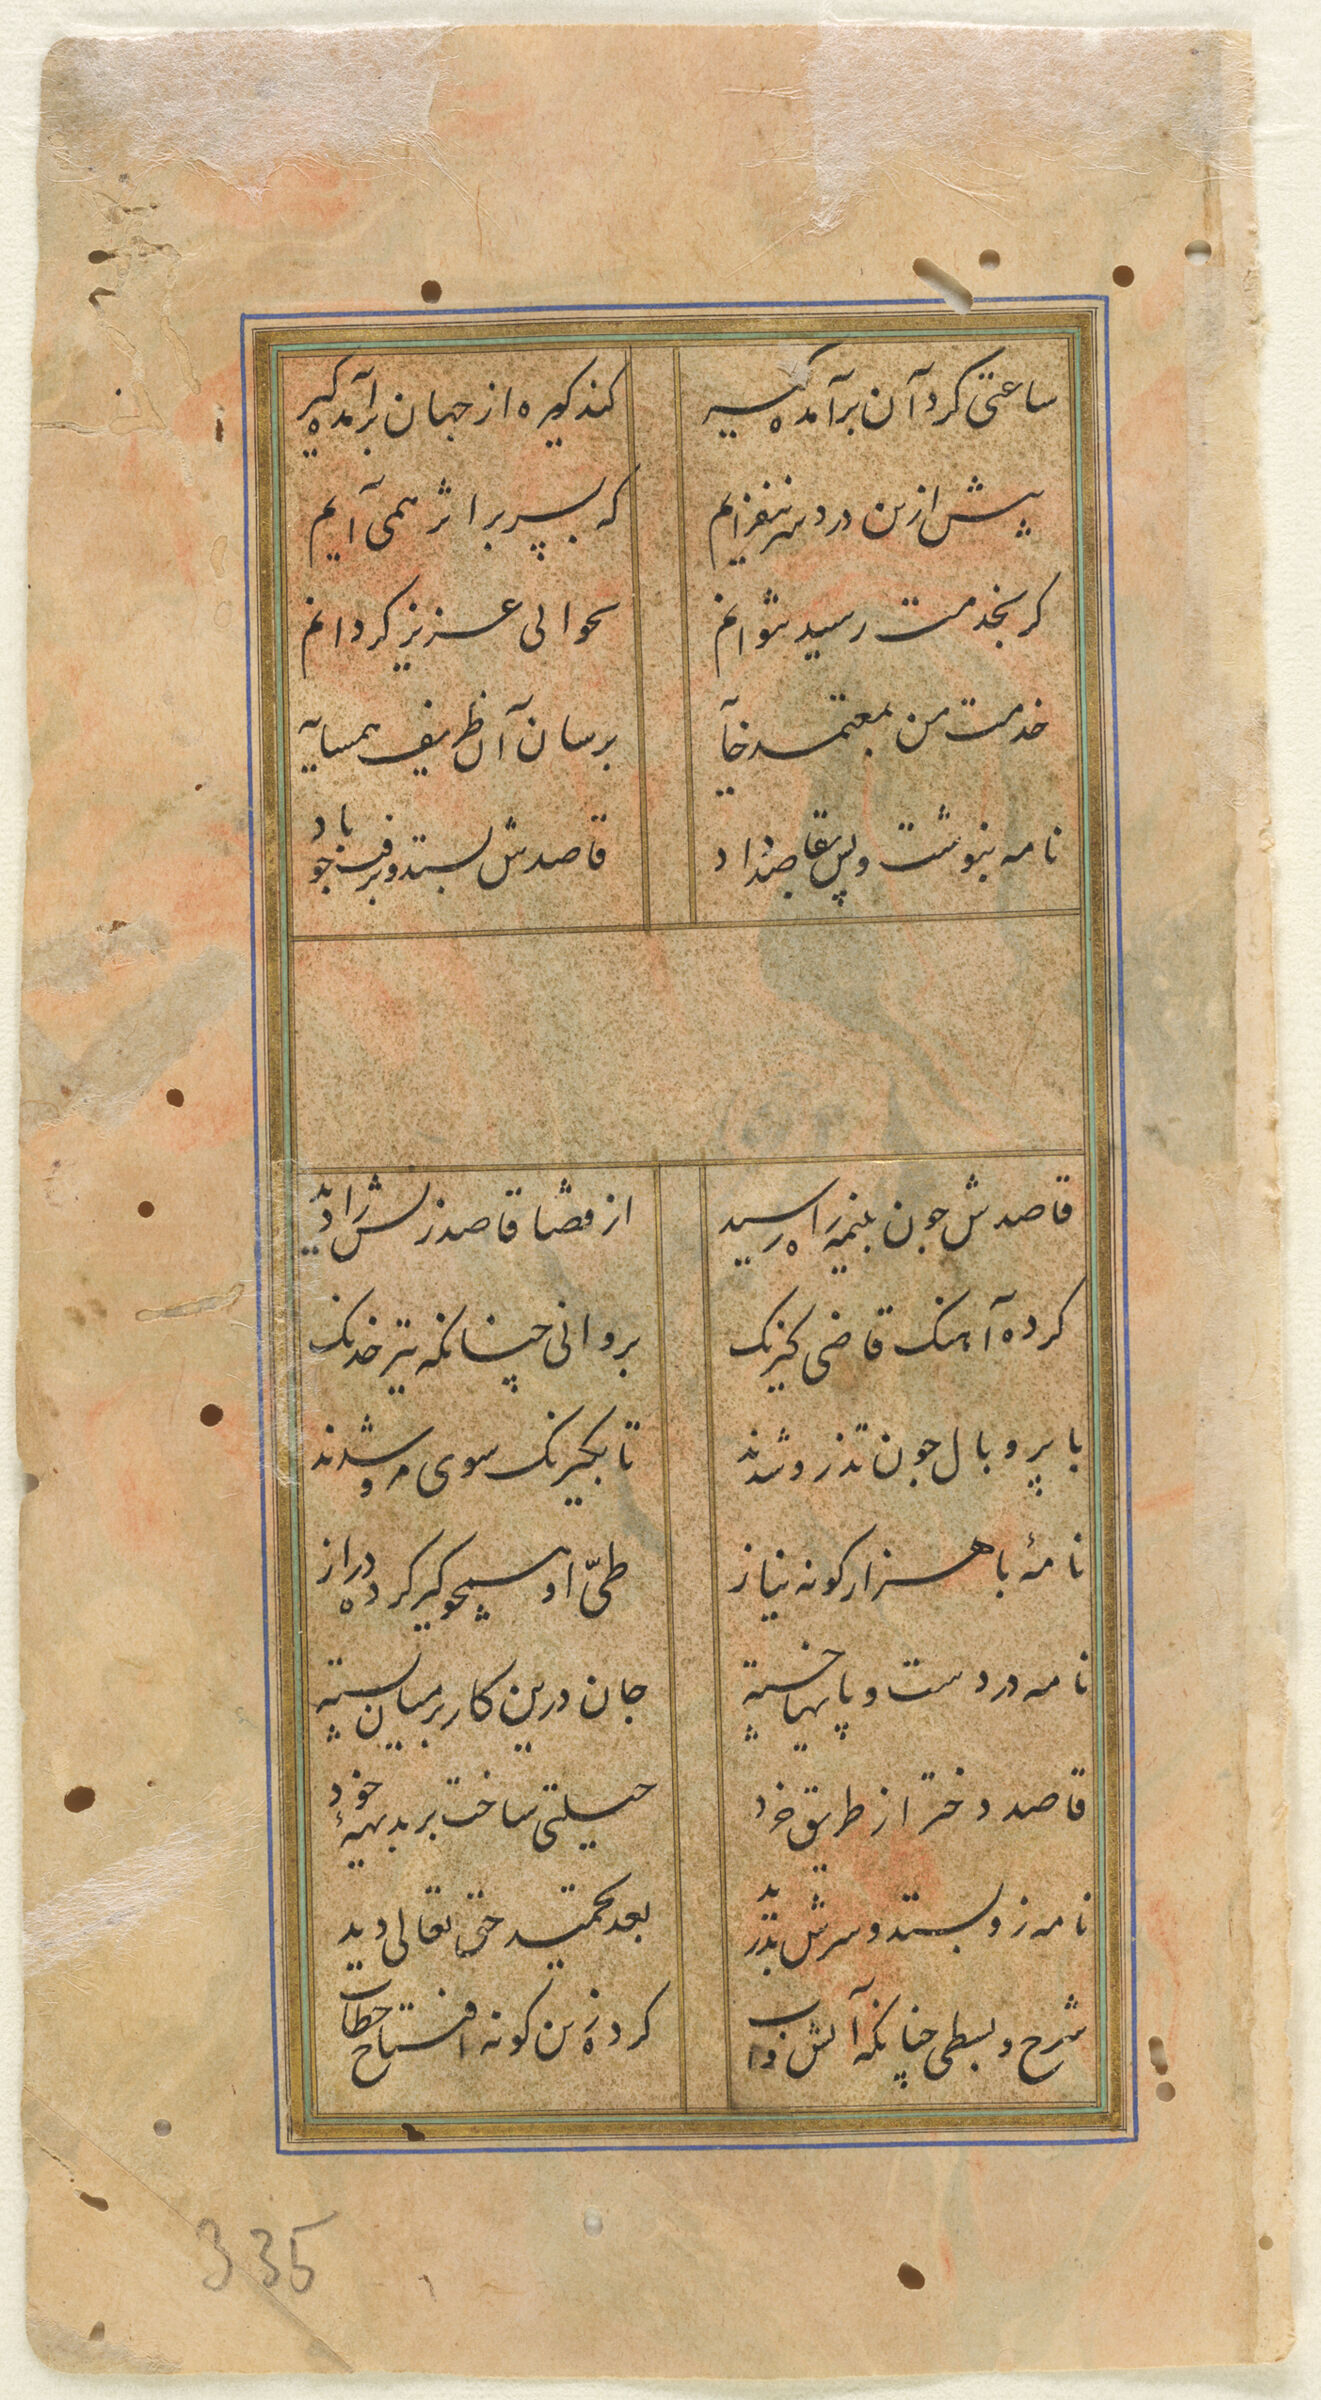 Folio 335 (Text, Recto And Verso), From A Manuscript Of The Divan (Collection Of Works) Of Anvari